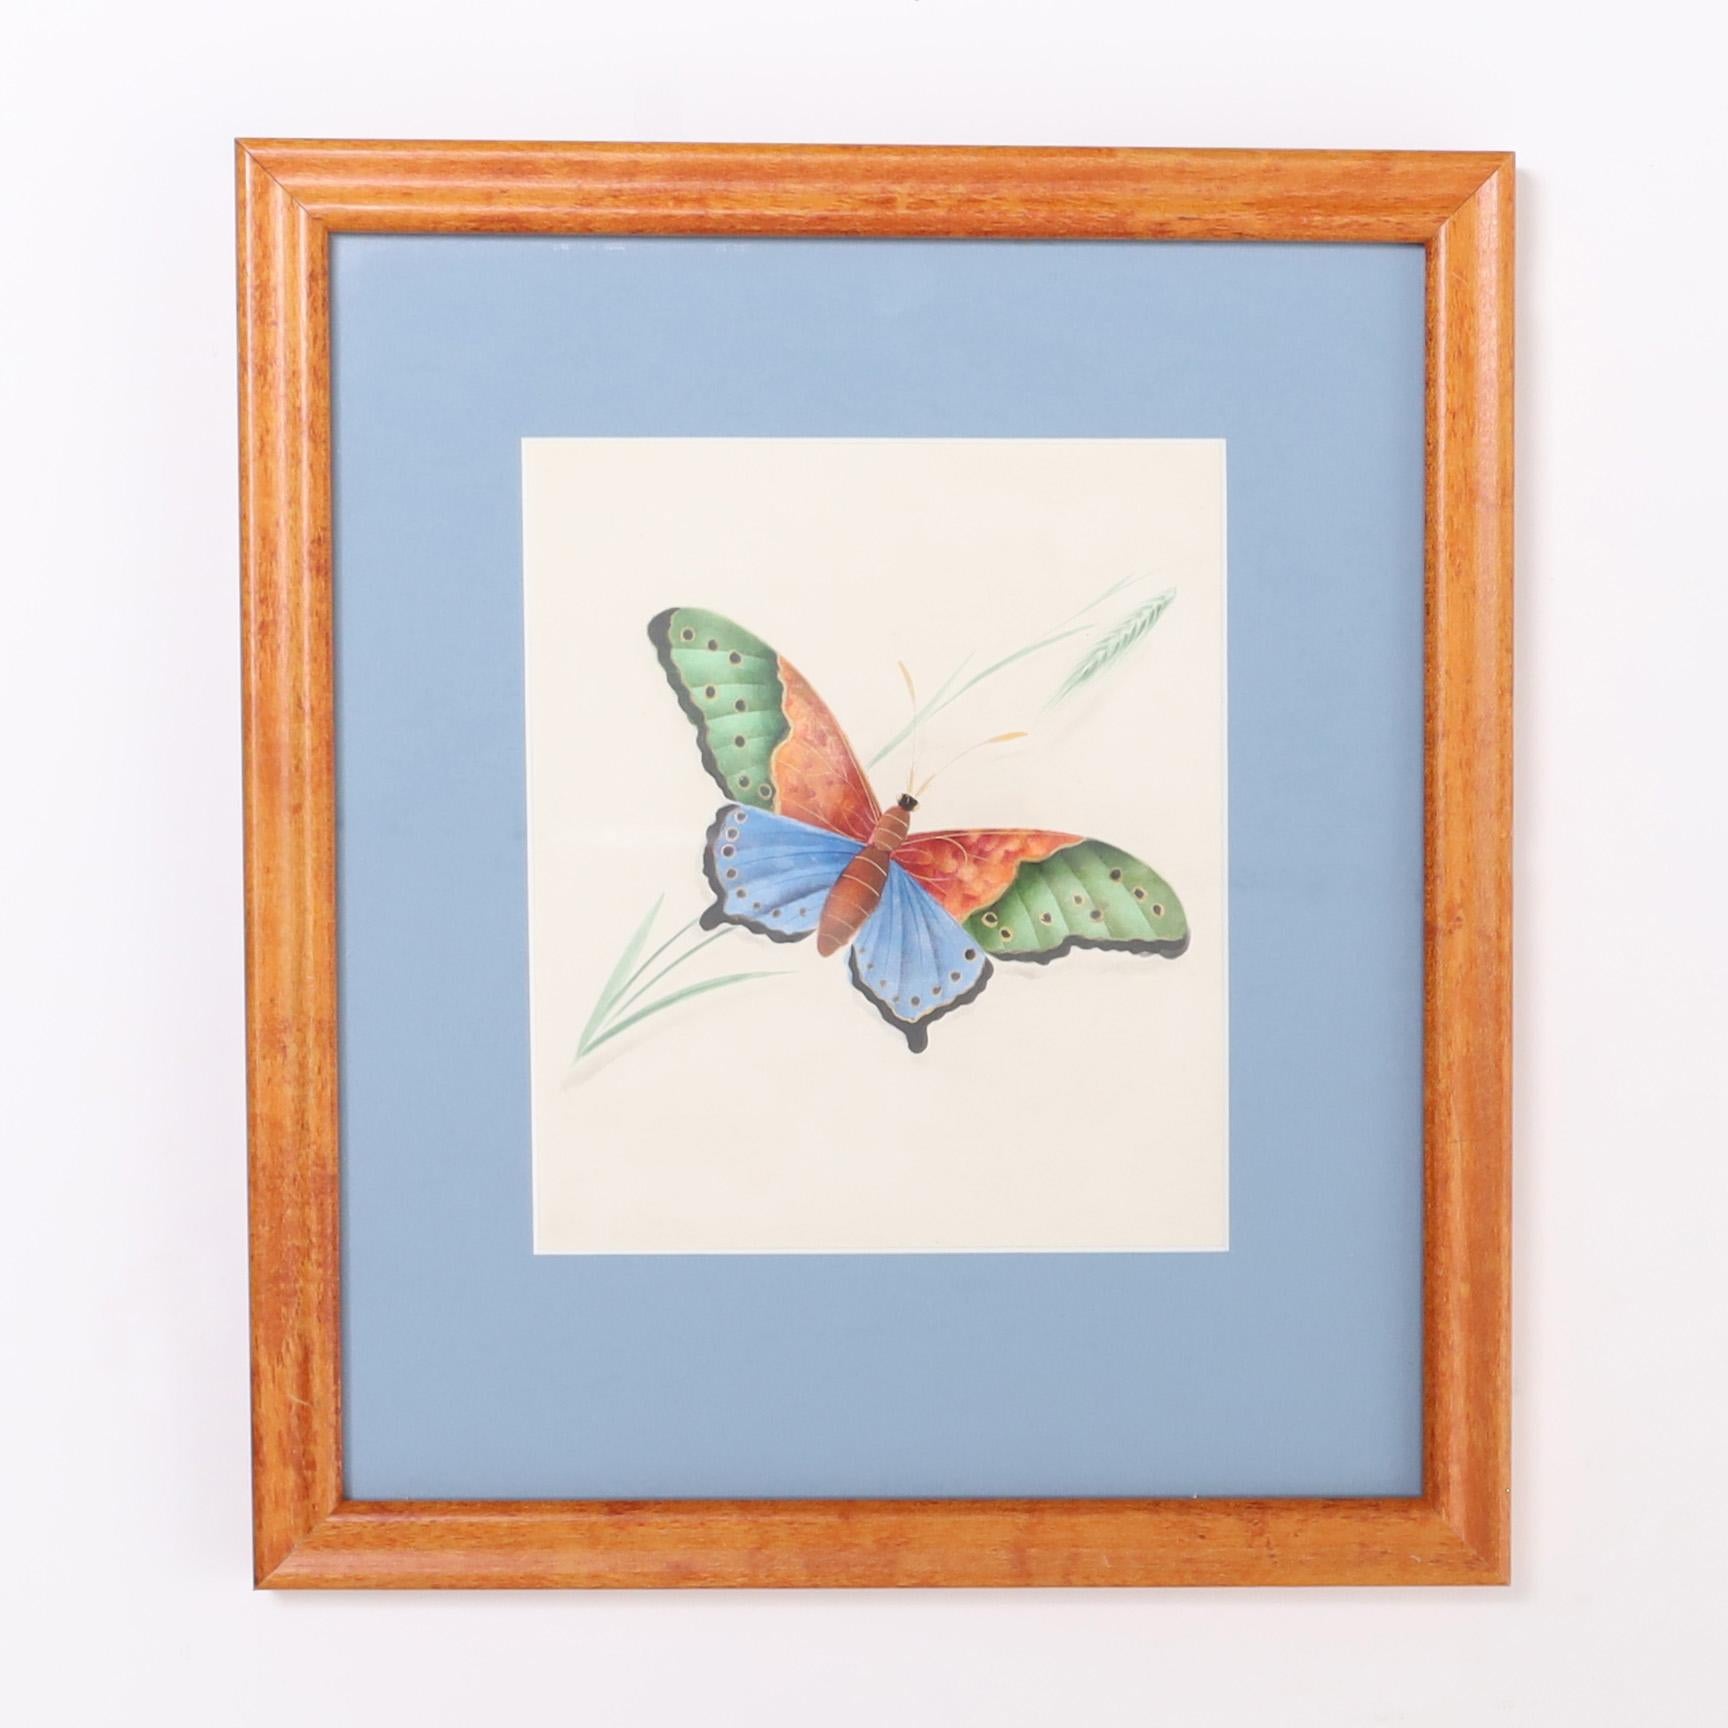 Lofty set of six watercolors on paper depicting the surprising diverse beauty of moth species. Presented in wood frames, matted and under glass.